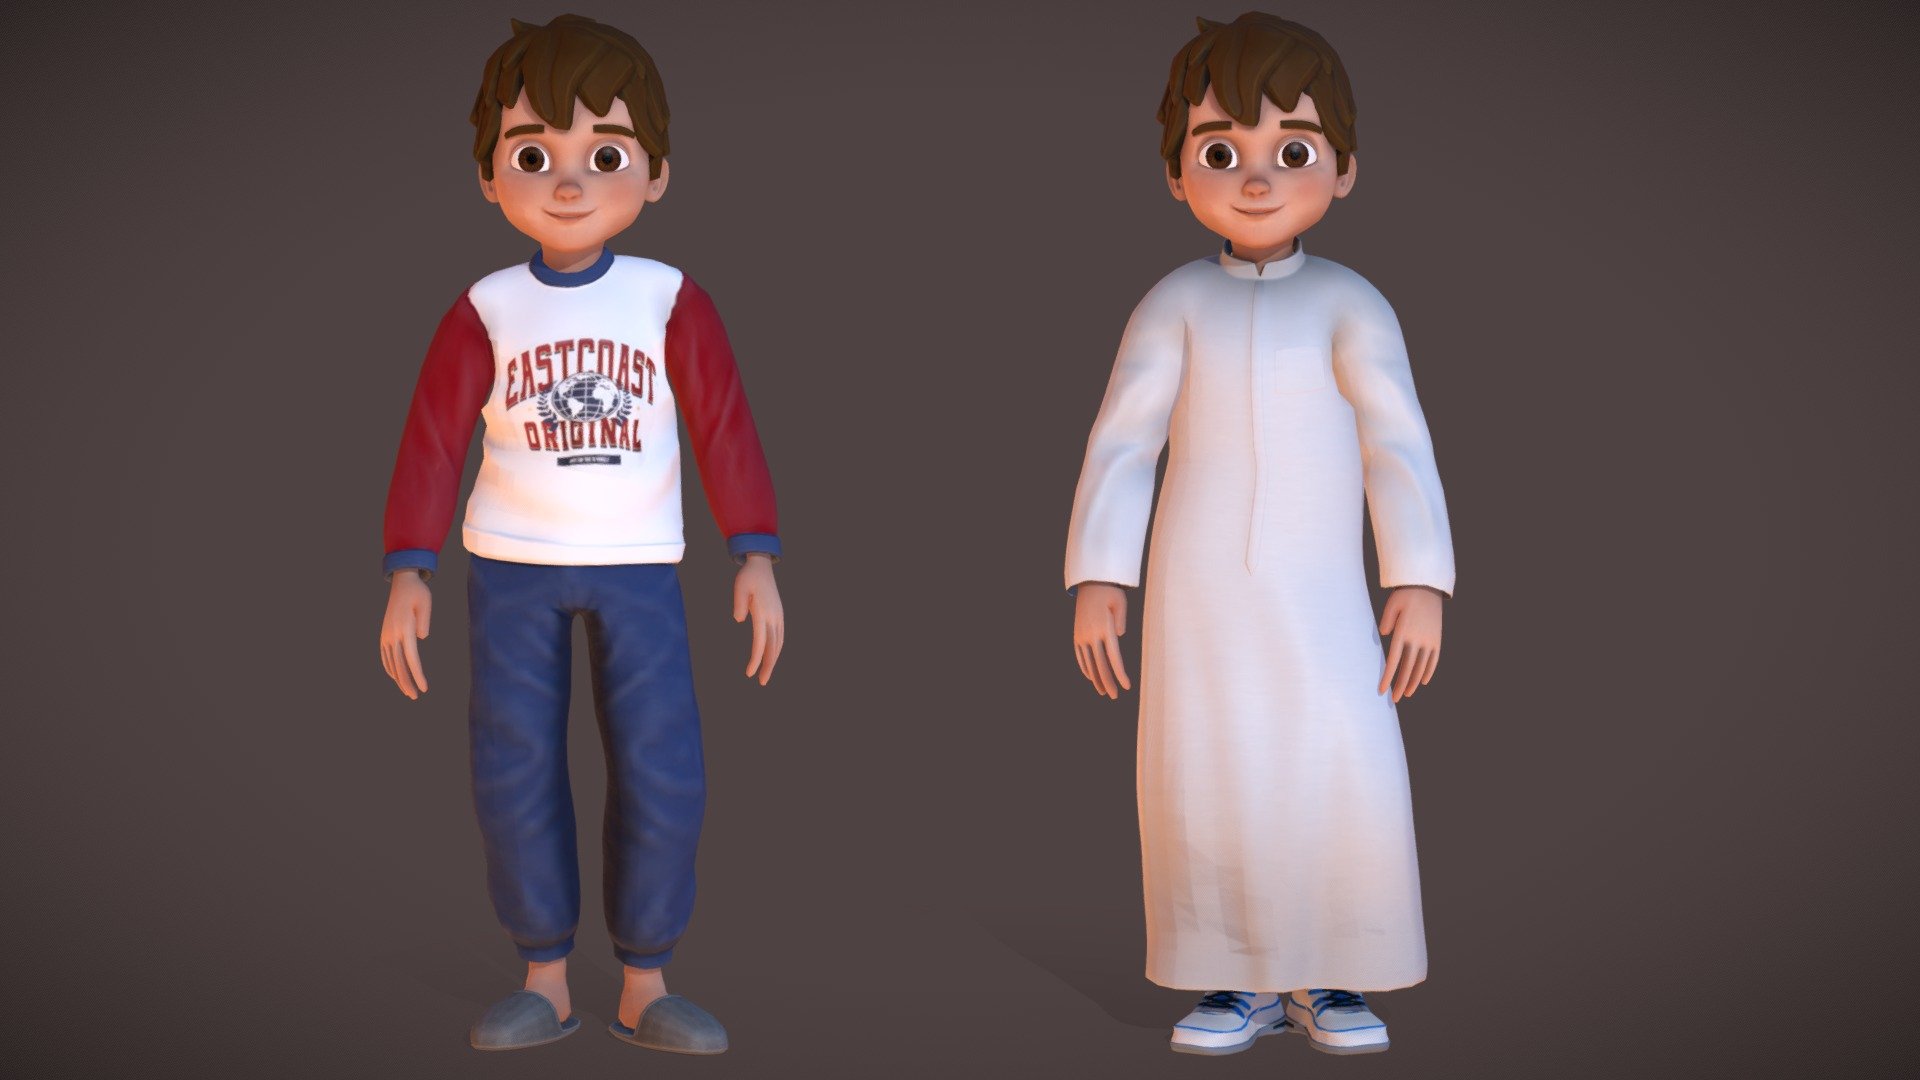 Arabi boy character made as a game-ready model in two versions, one with a school uniform and the other with a pajama outfit 3d model